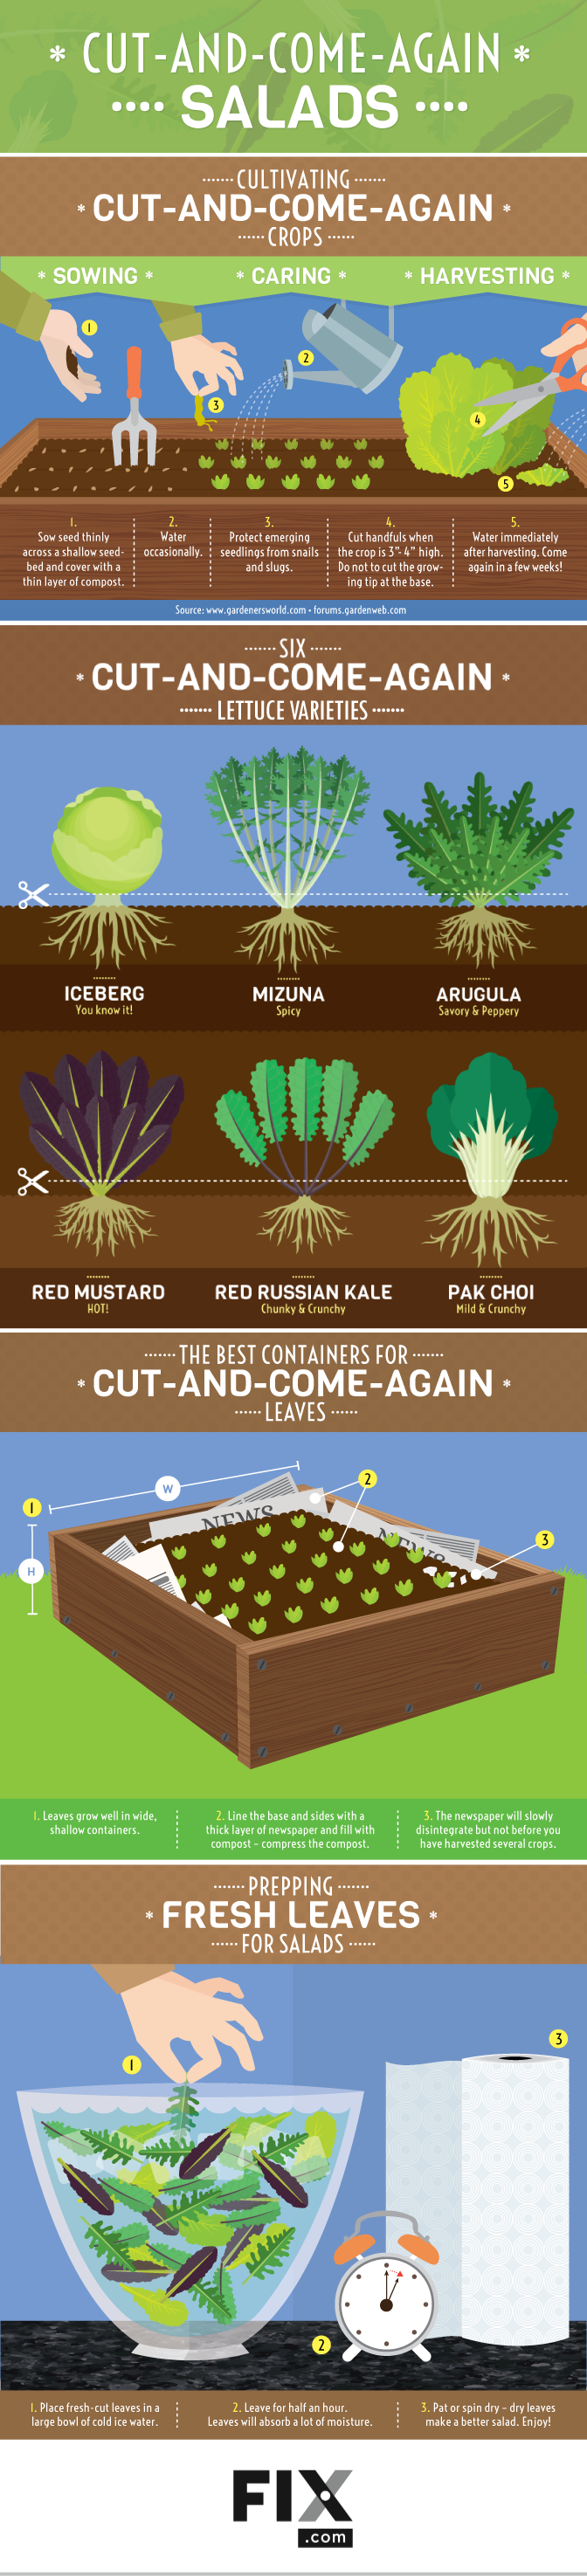 Cut-and-Come-Again Salads #infographic